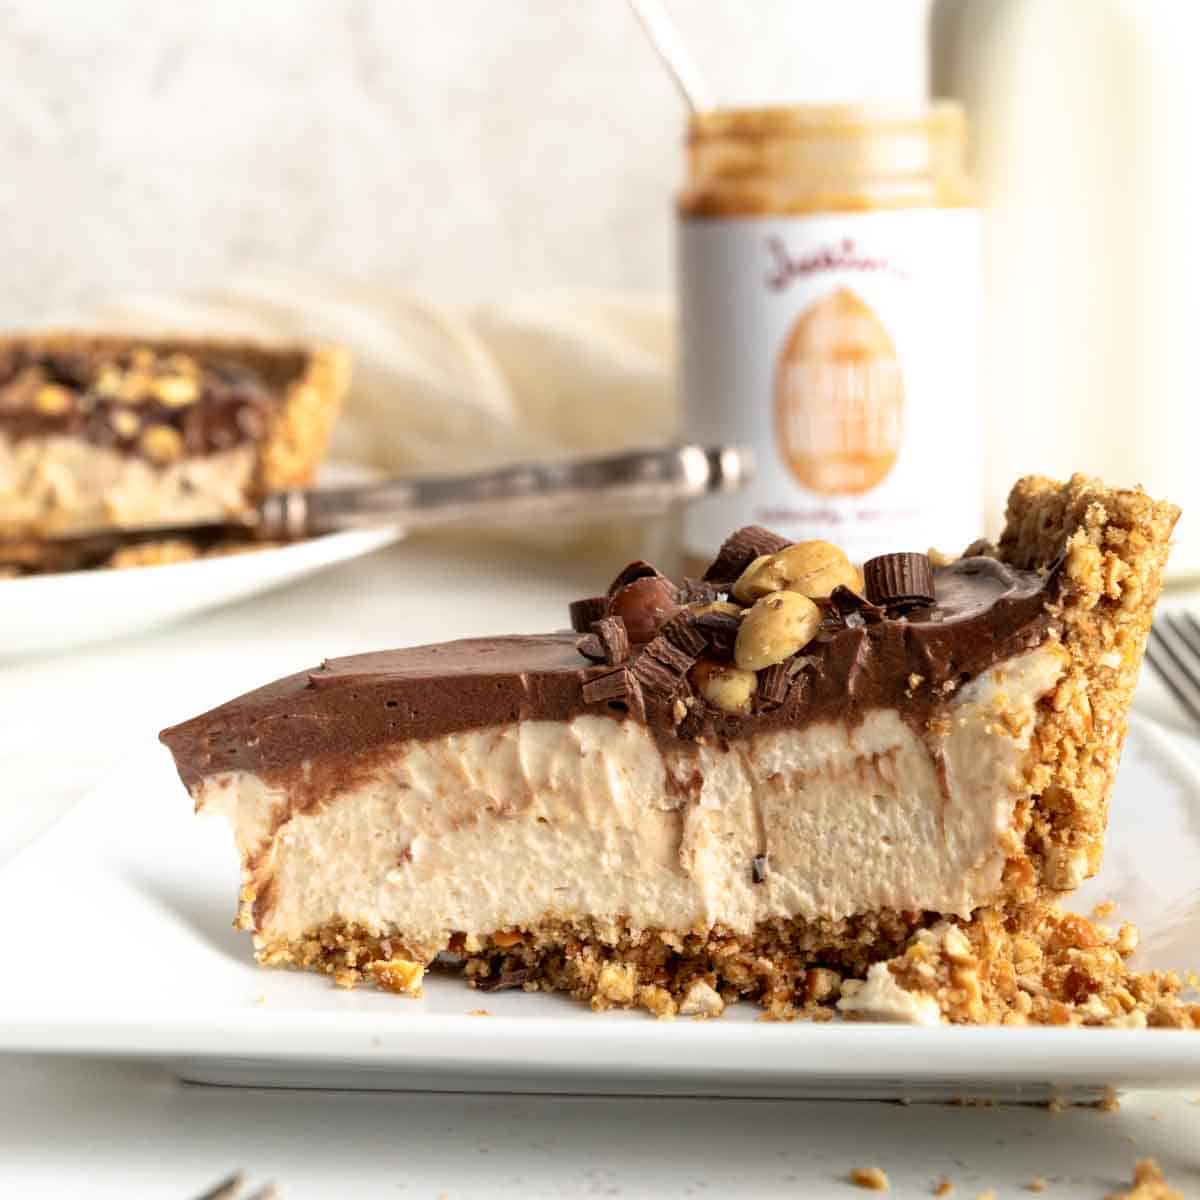 A slice of no bake chocolate peanut butter pie on a plate